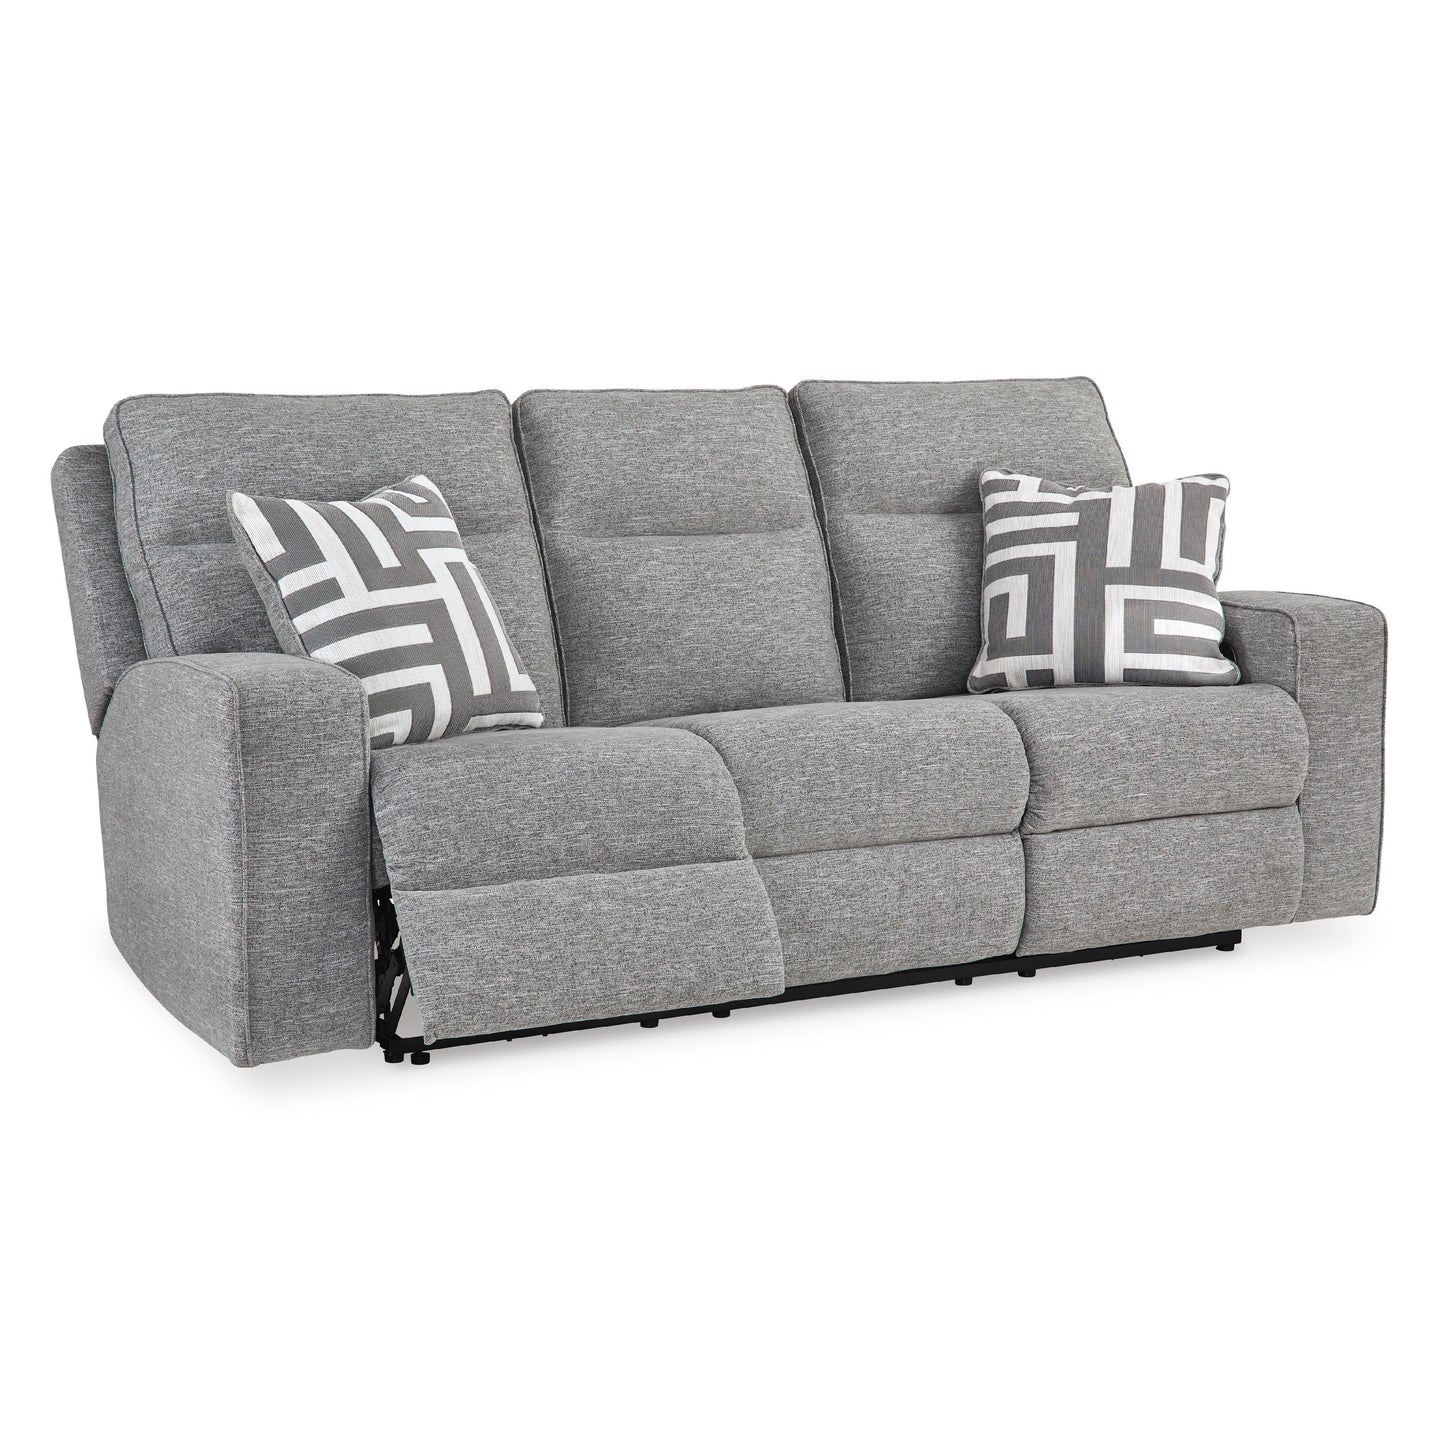 Signature Design by Ashley Biscoe Power Reclining Fabric Sofa 9050315 IMAGE 2